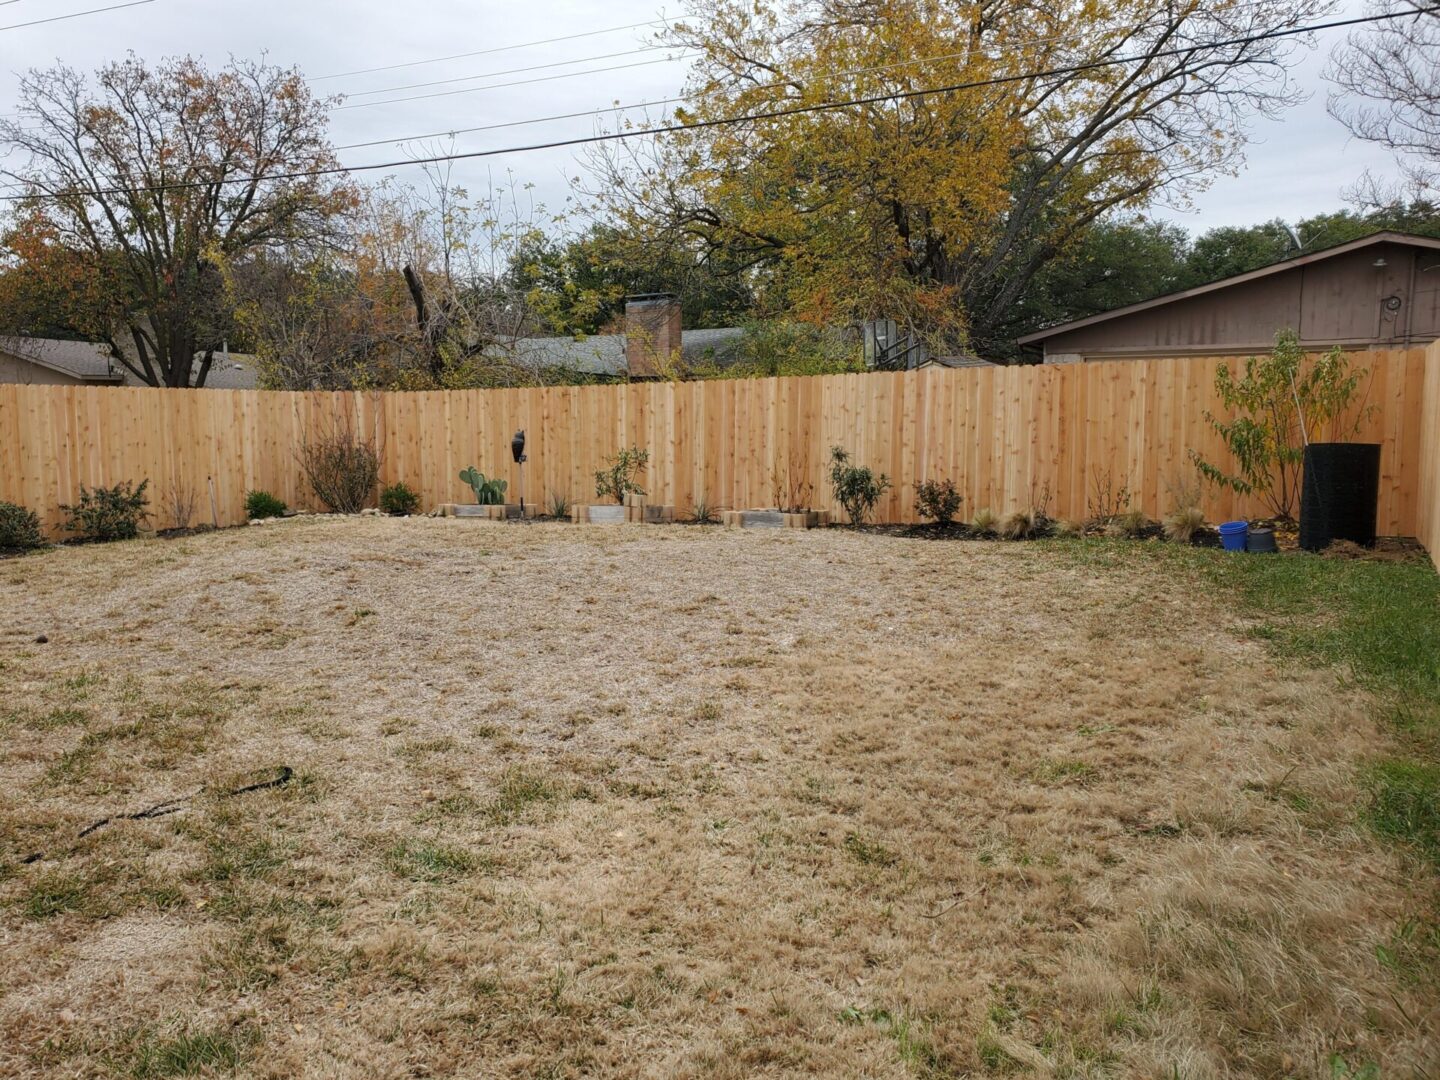 A fenced in yard with dirt and trees.